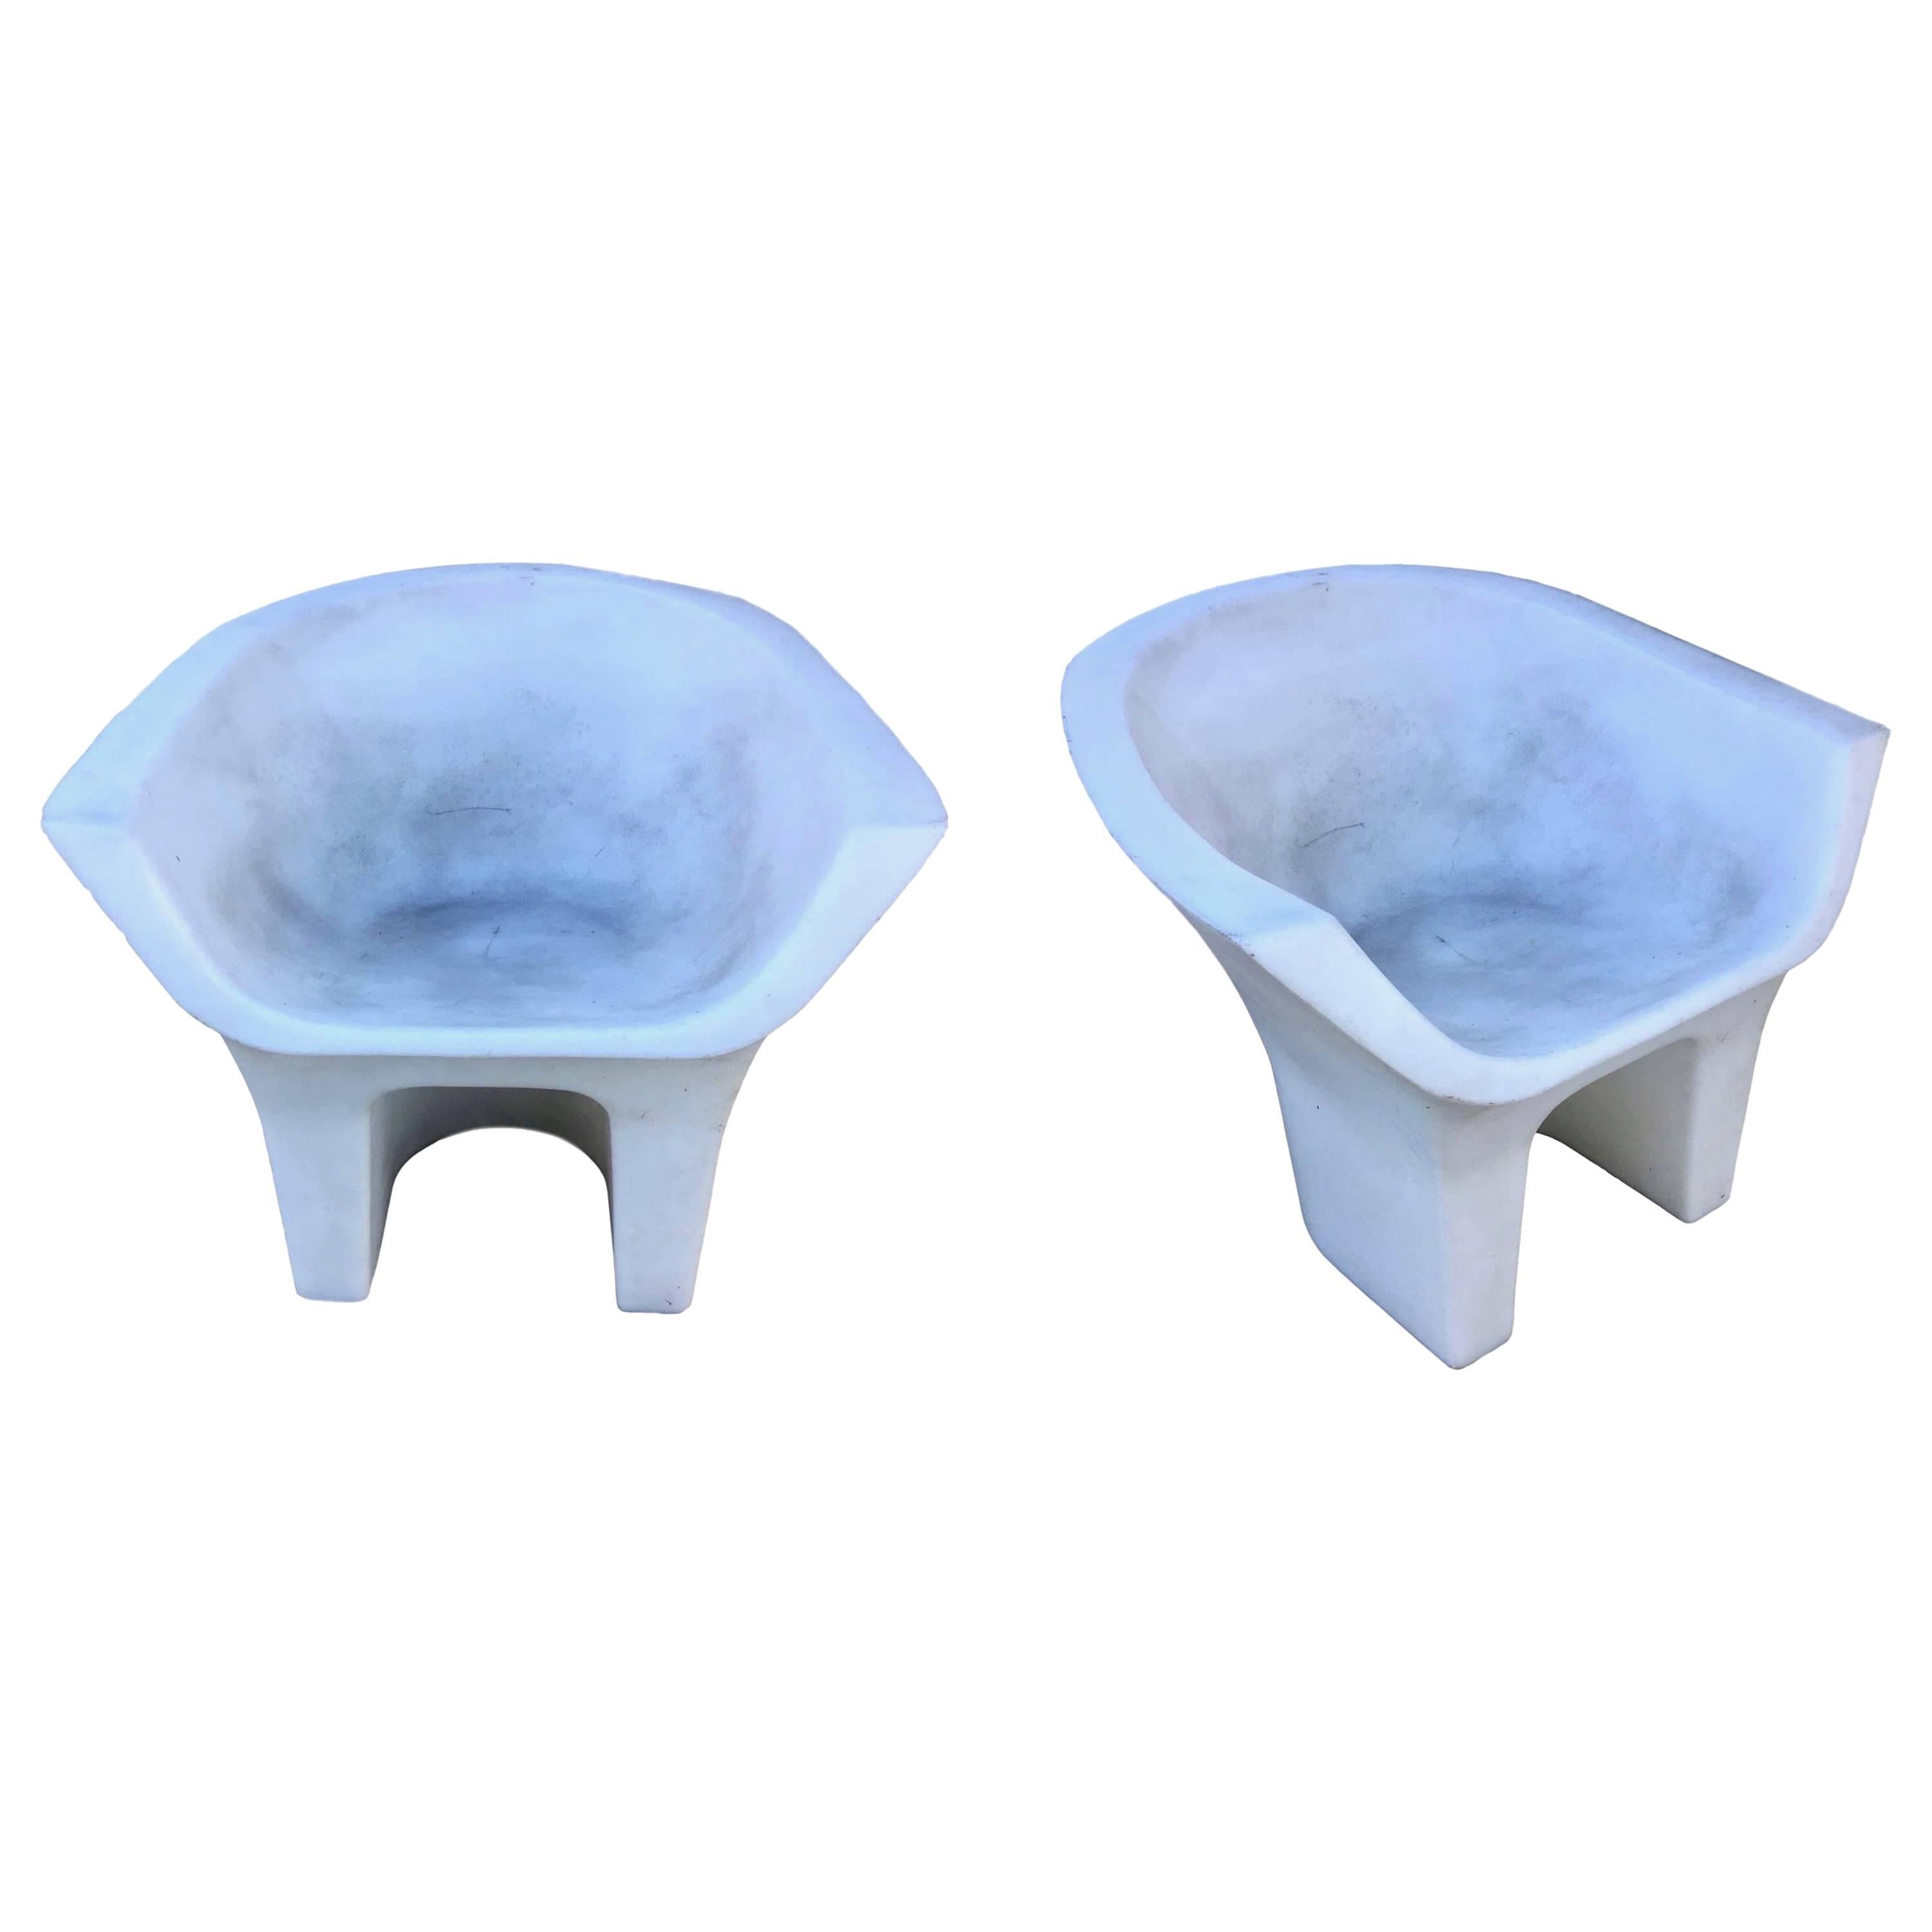 Pair of Sculptural Molded Plastic Outdoor Chairs